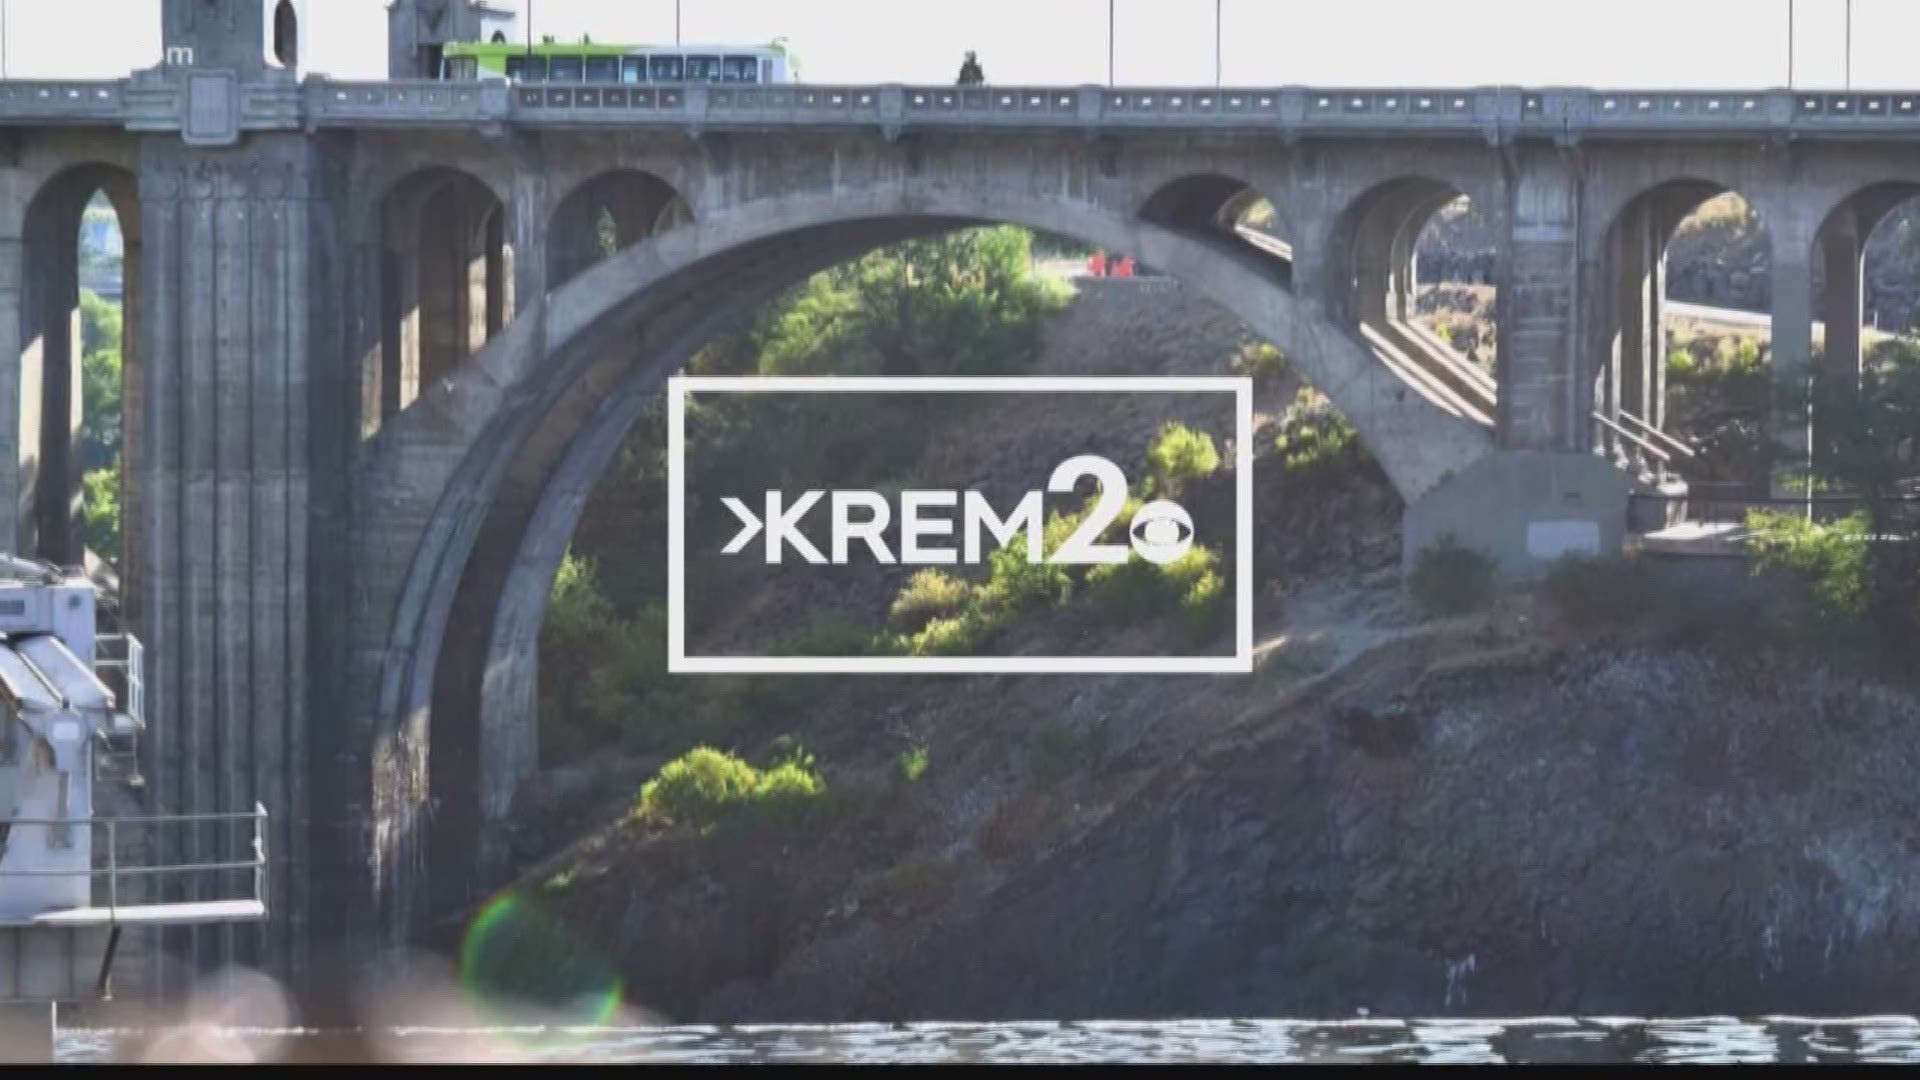 KREM 2 News at 6 coronavirus coverage and other top stories for Spokane and North Idaho on May 27, 2020